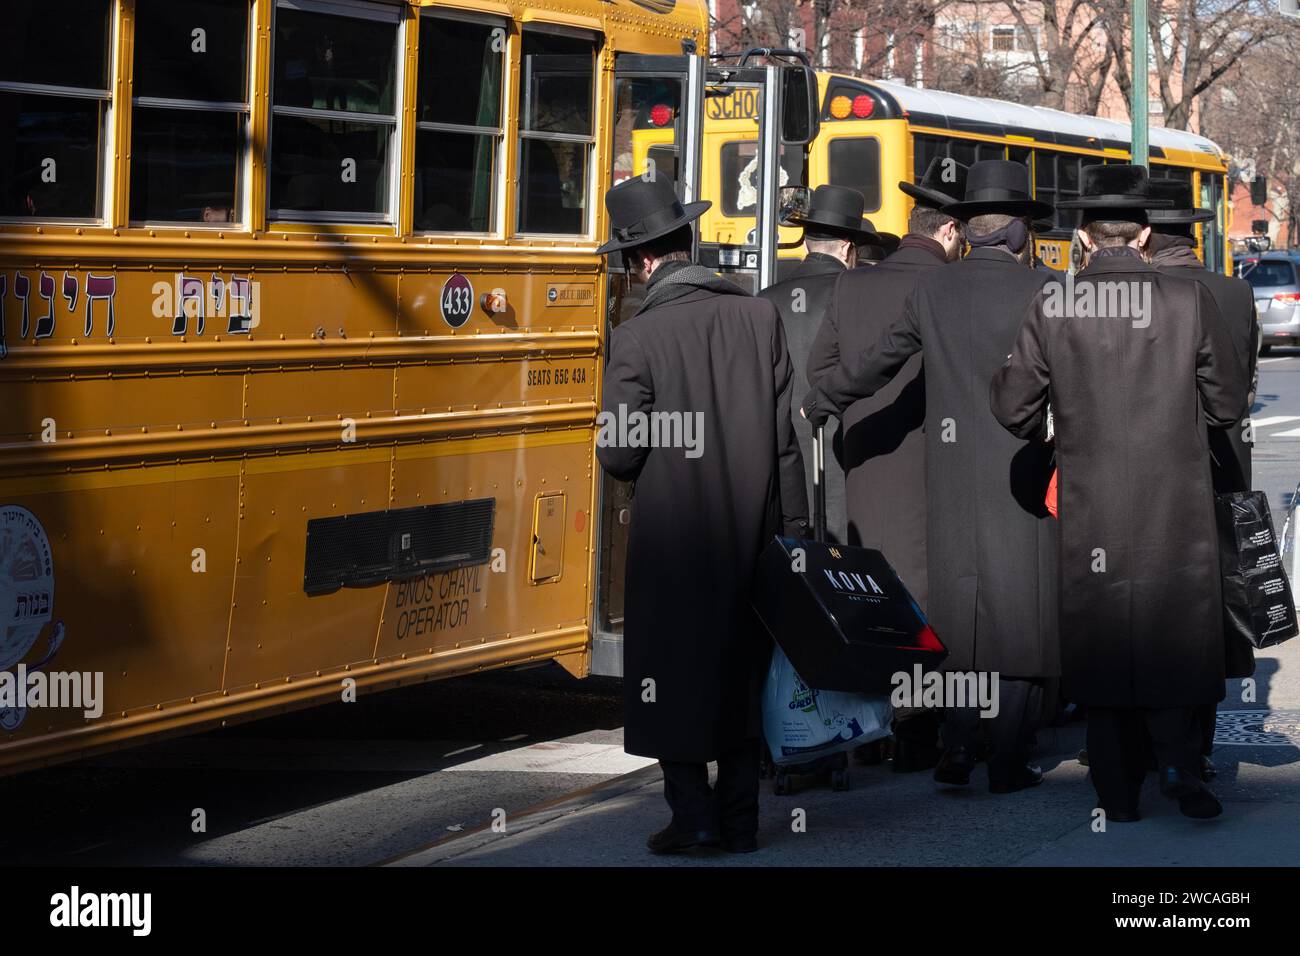 On a cold winter day, orthodox jewish young men board a bus to attend a Talmud study group on the other side of Brooklyn. Bedford Ave in Williamsburg. Stock Photo